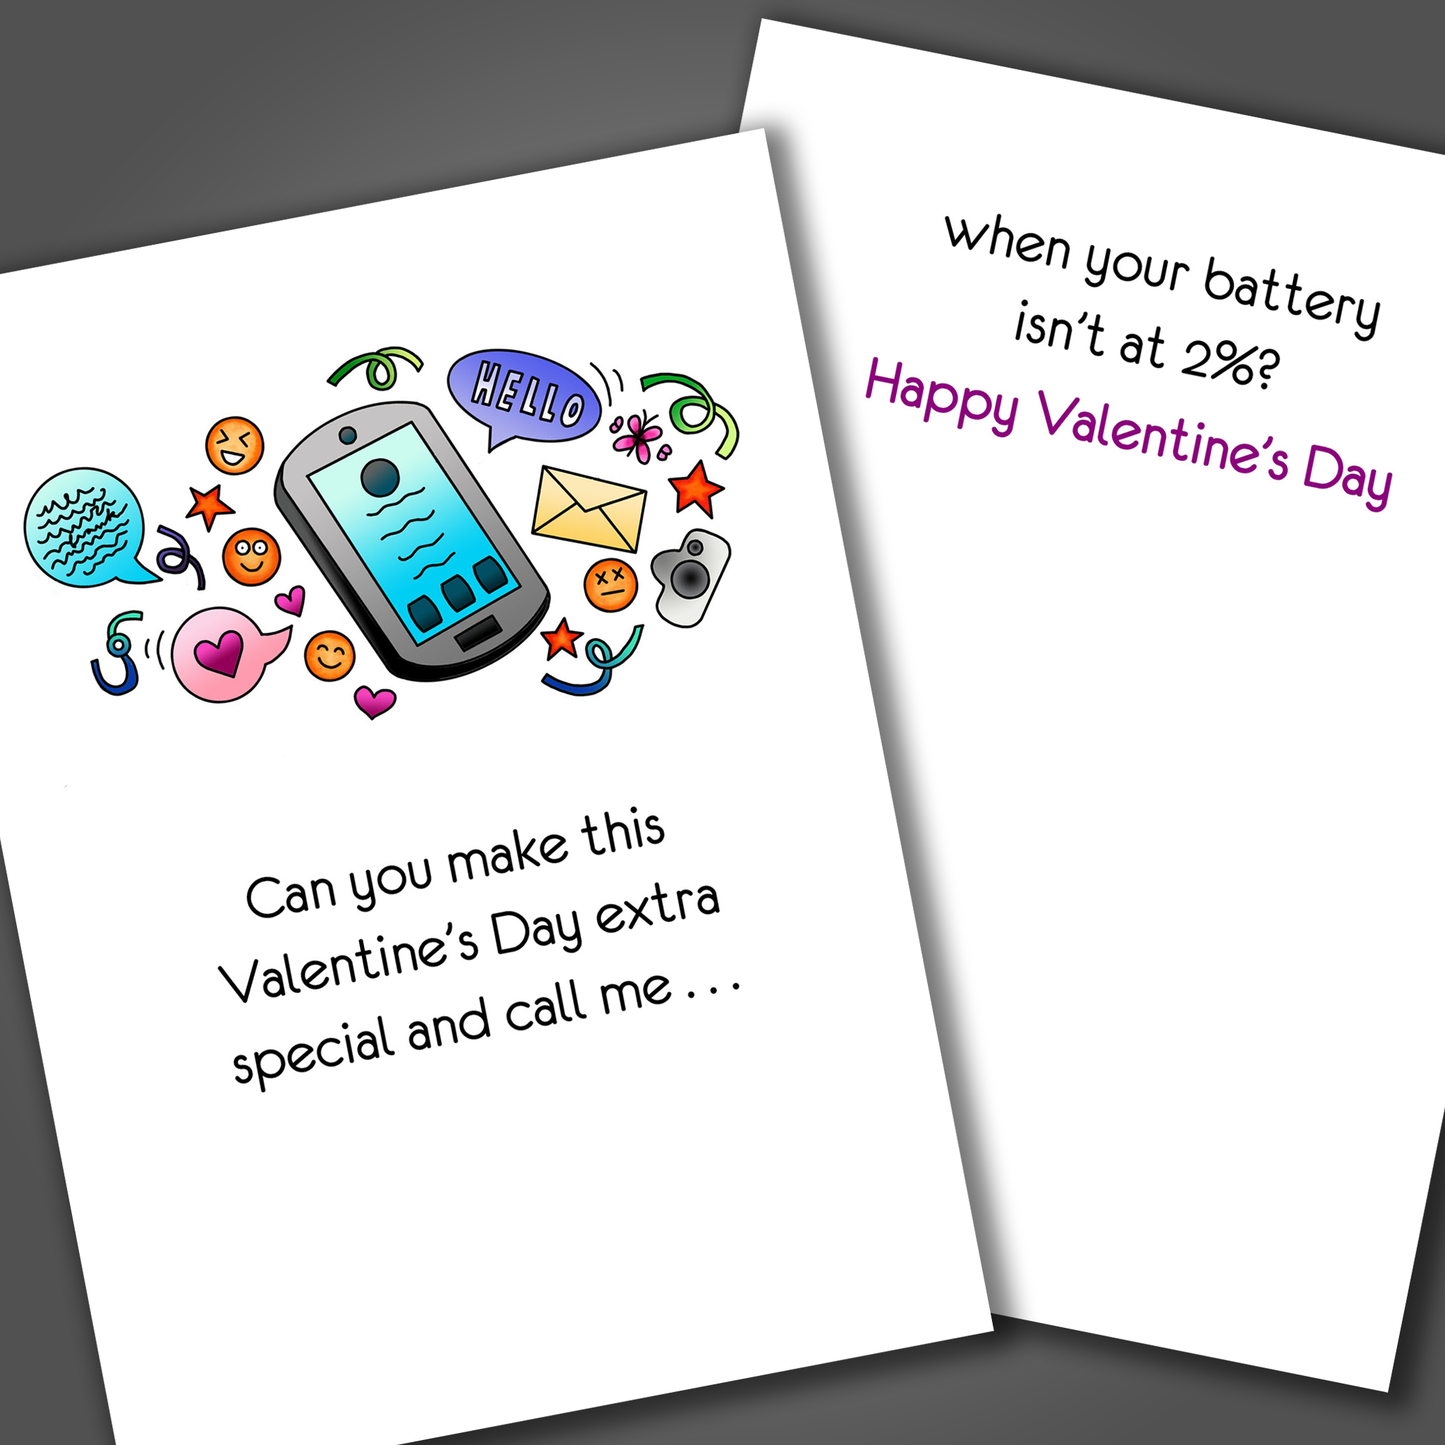 Funny Valentine's day card with a cell phone drawn on the front of the card. Inside of the card is a funny joke asking the recipient to not call when their phone battery is low. Ends with happy valentine's day